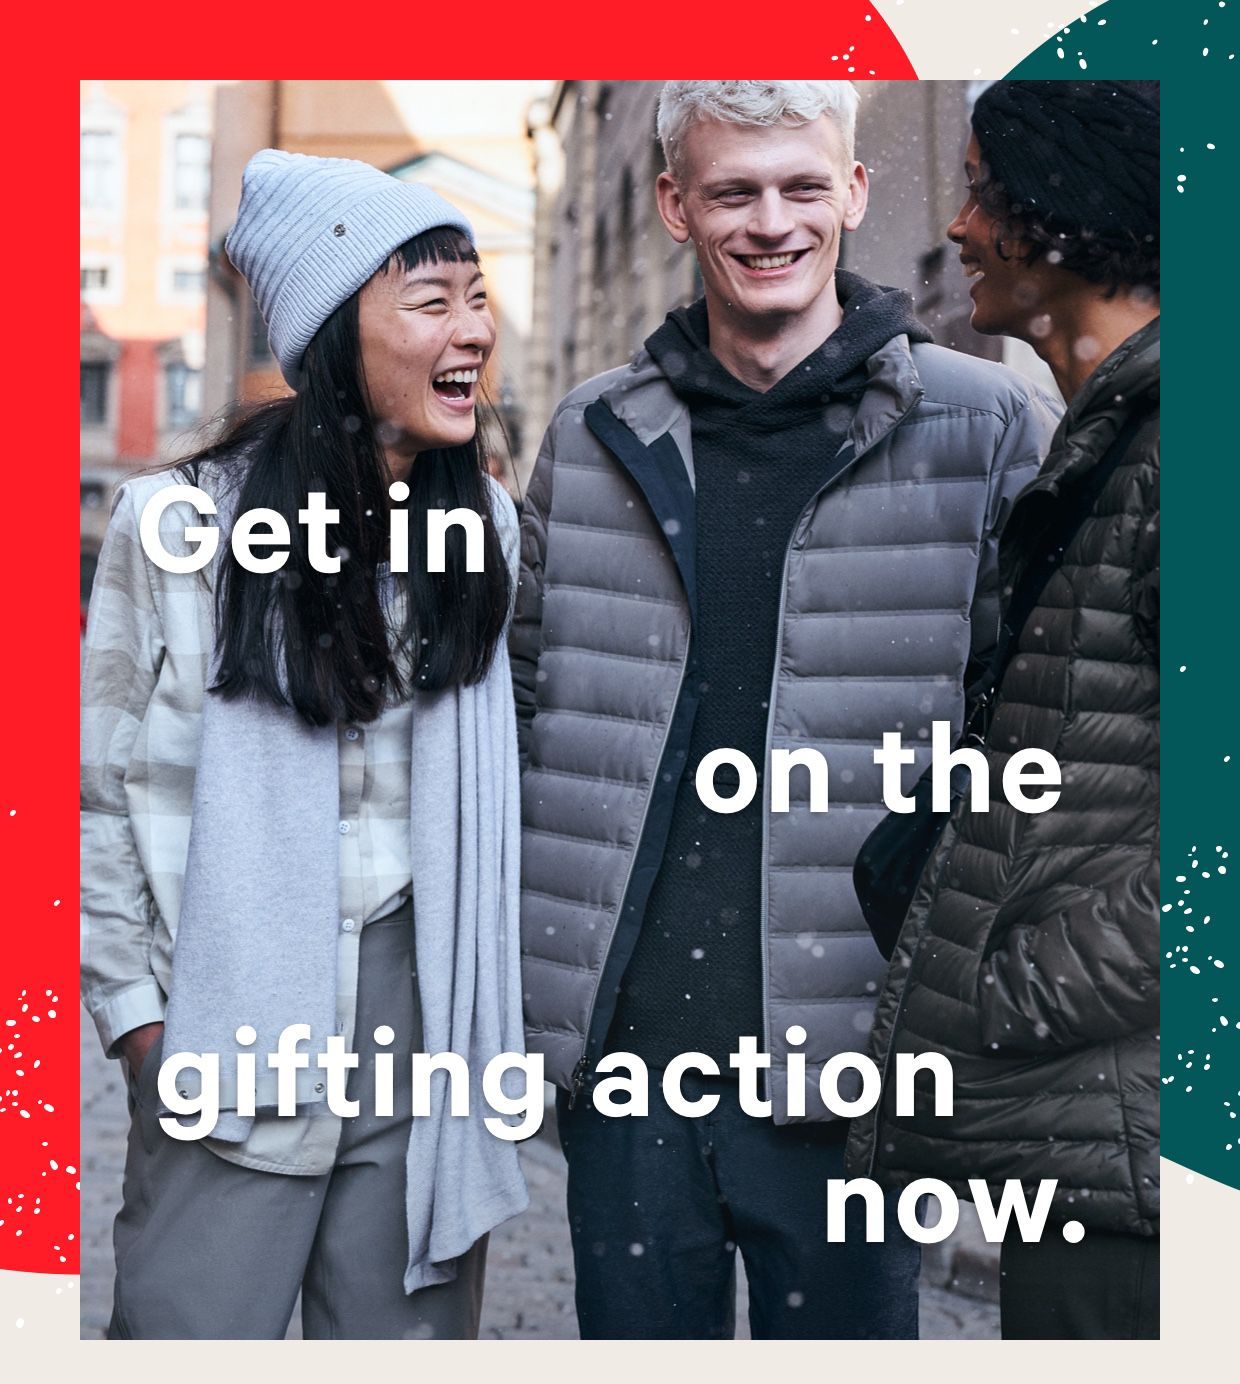 Get in on the gifting action now.